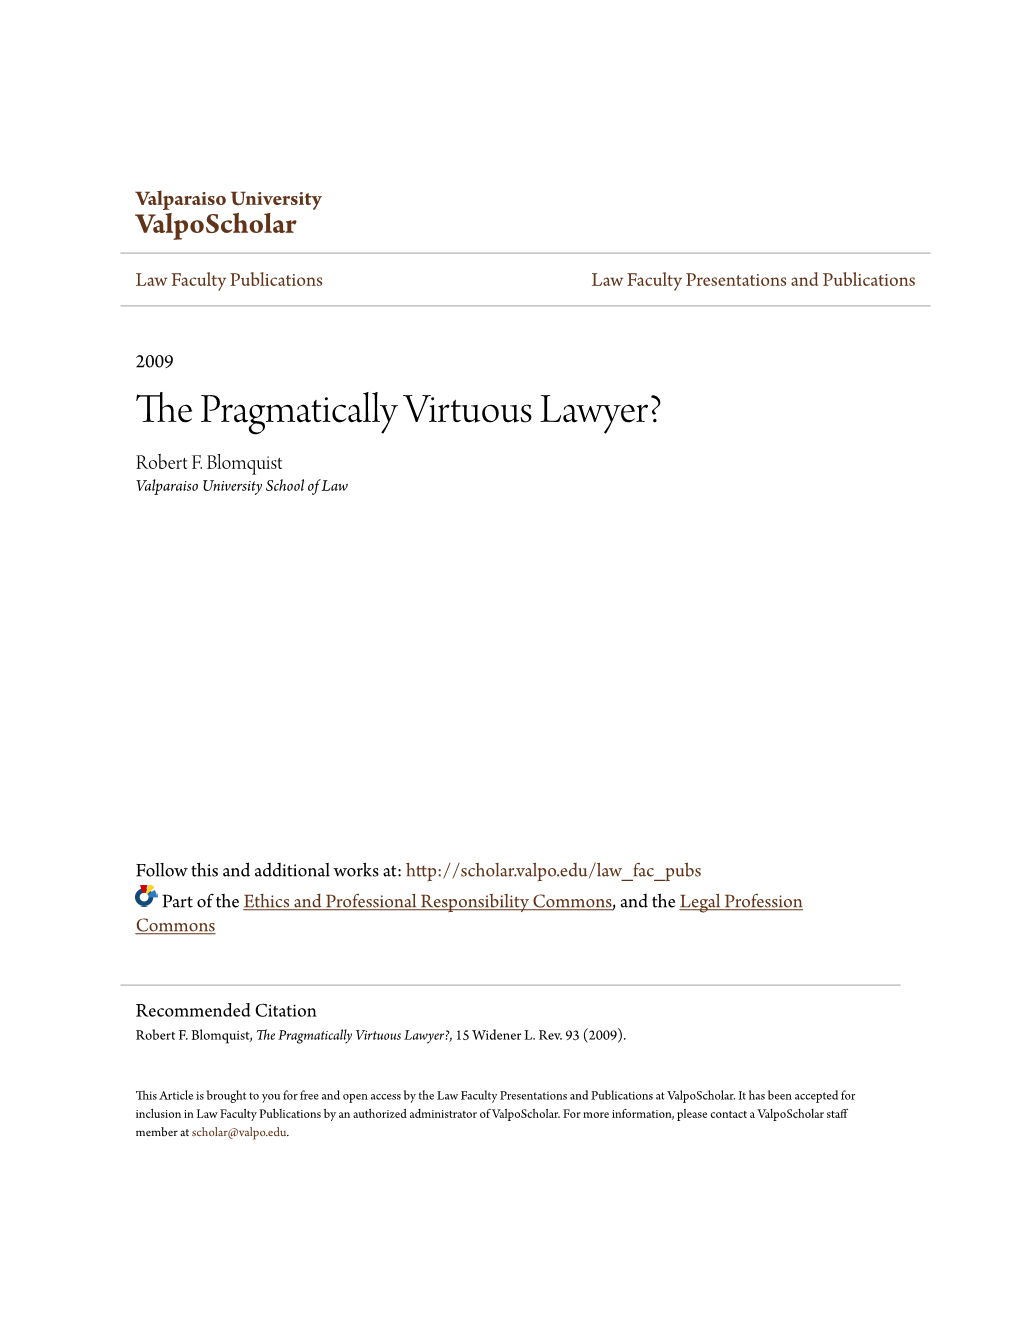 The Pragmatically Virtuous Lawyer?, 15 Widener L